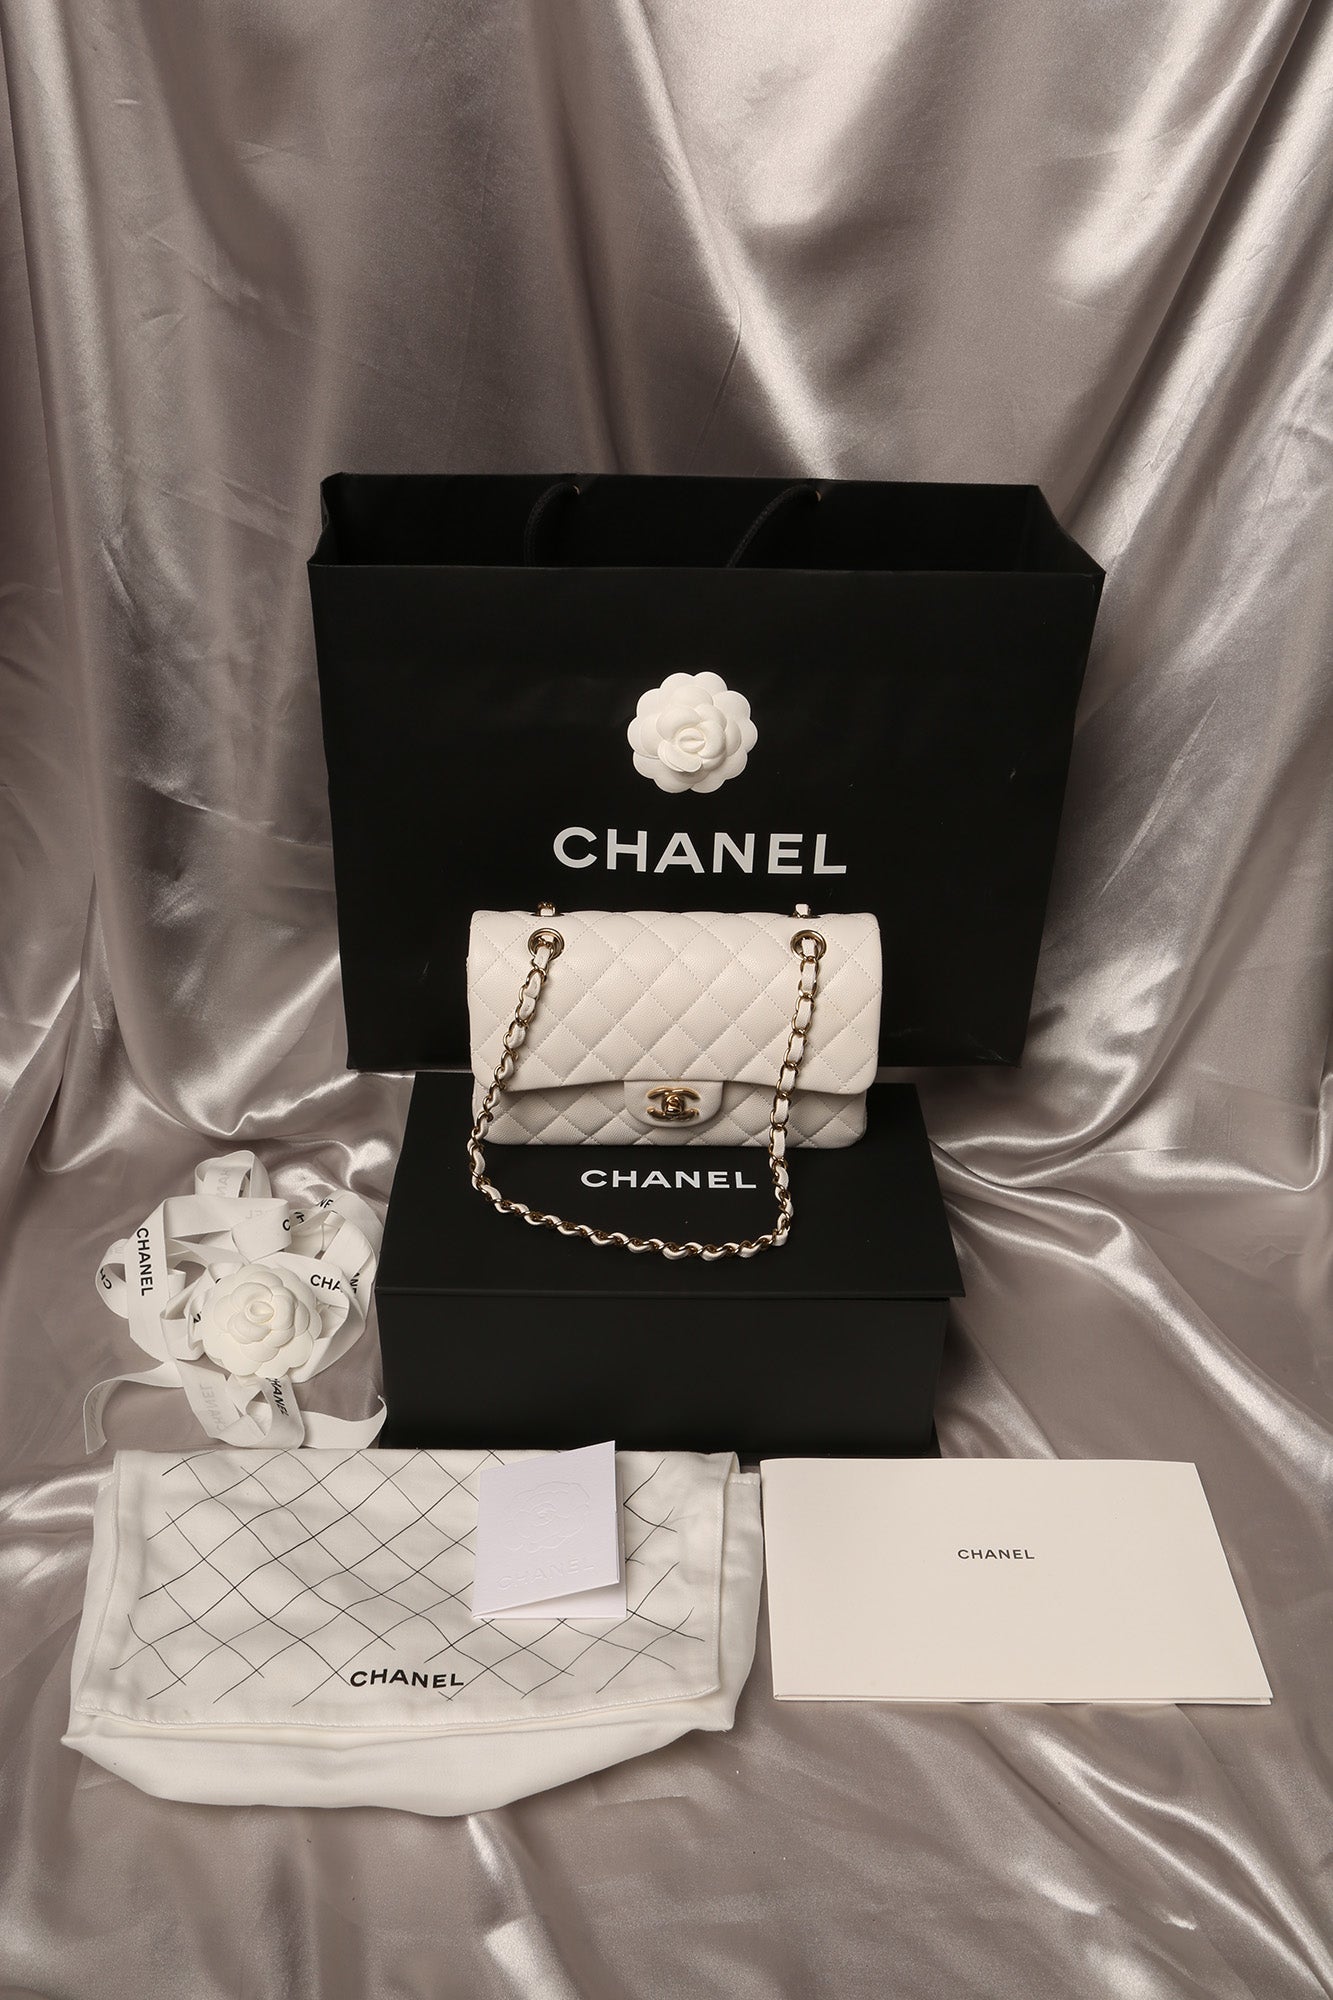 CHANEL, Bags, Authentic Chanel Shopping Tote Paper Bag